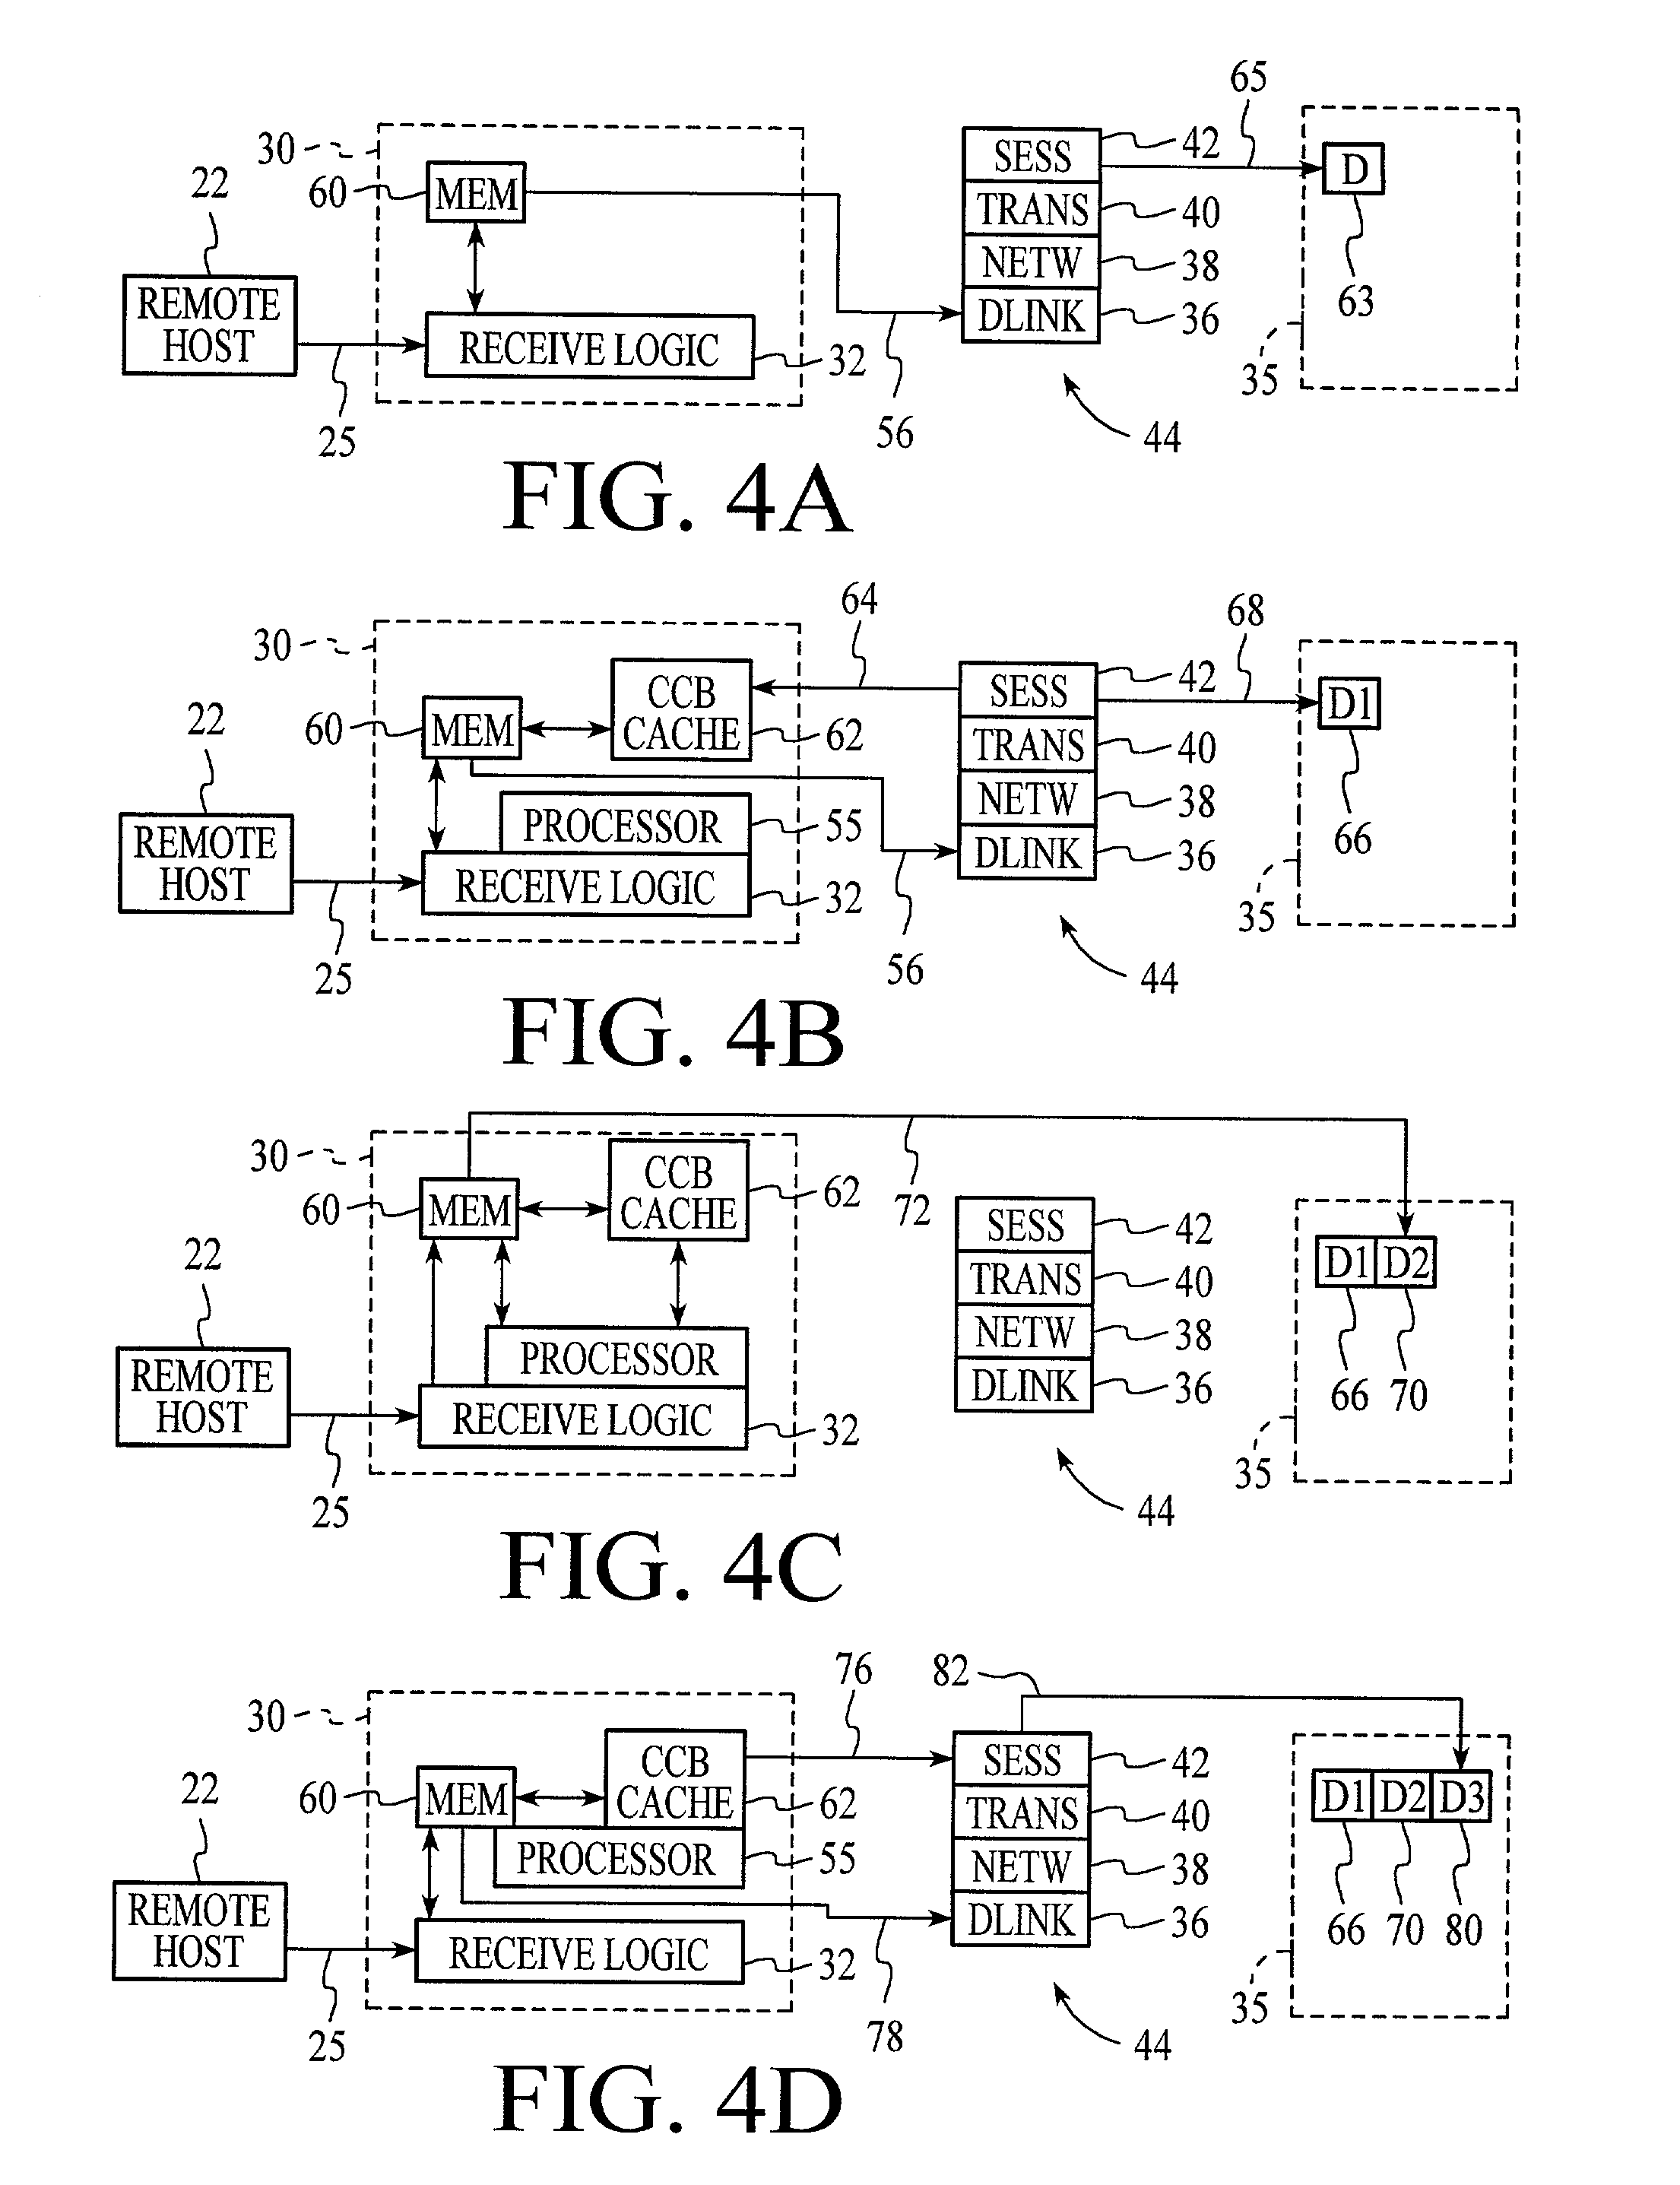 Passing a communication control block from host to a local device such that a message is processed on the device